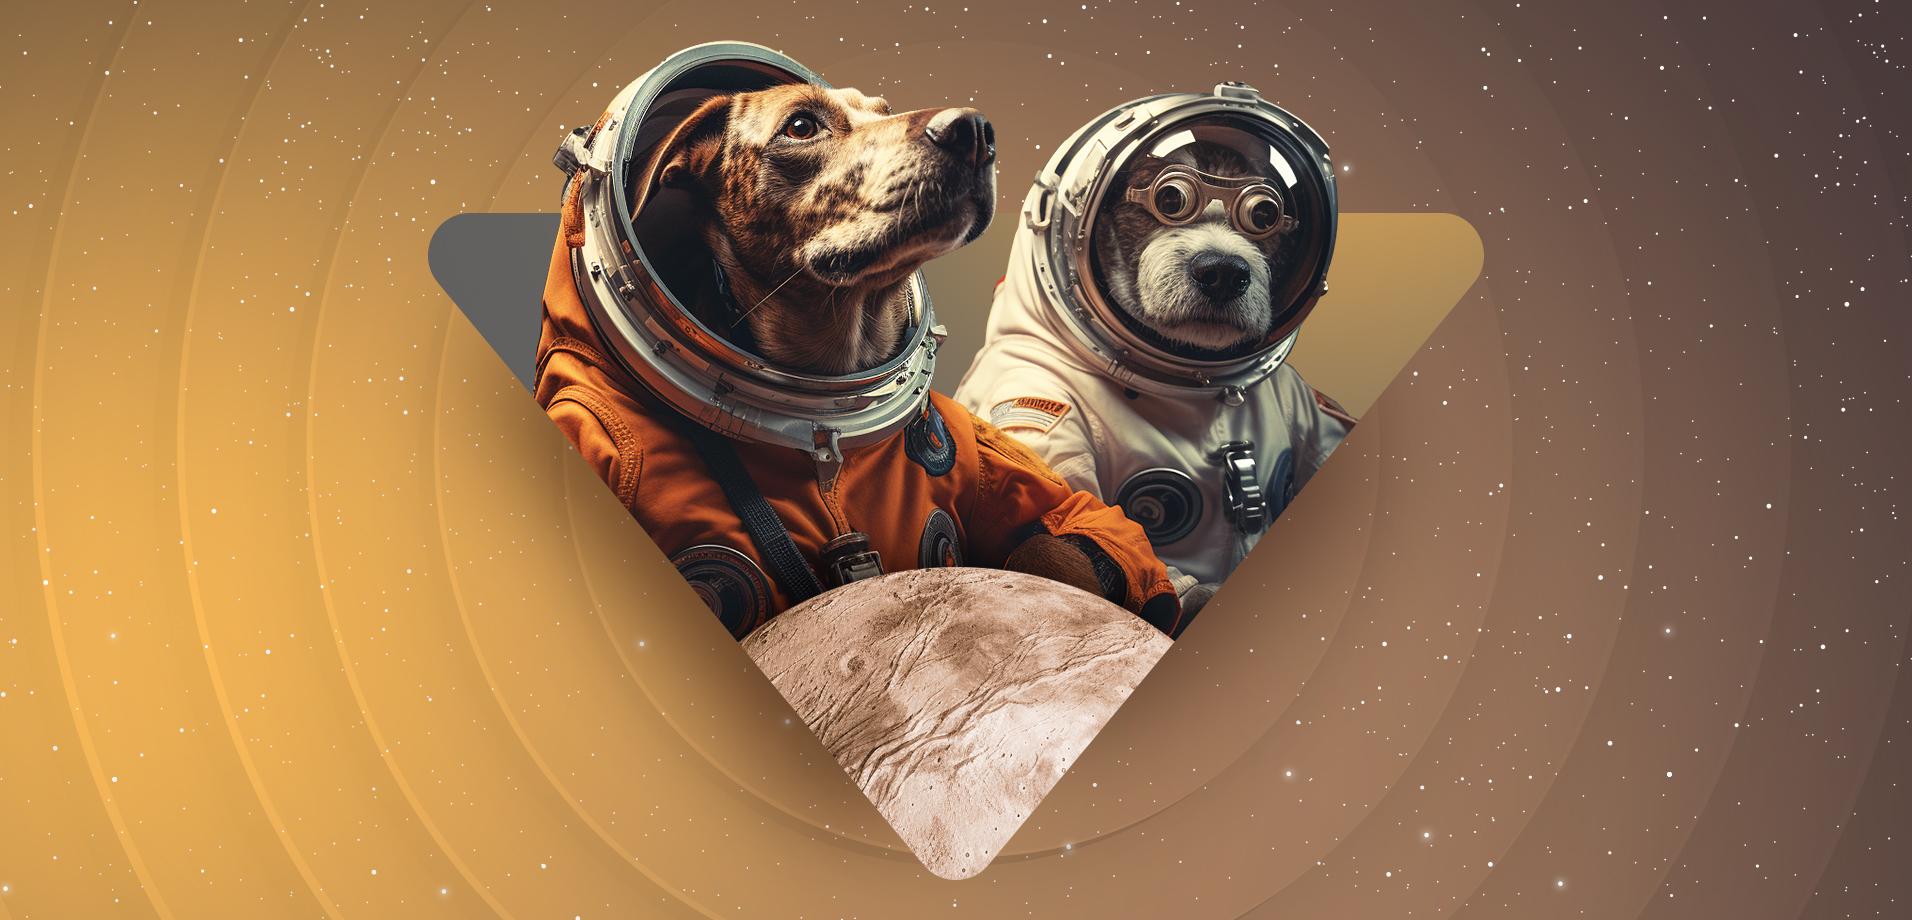 The first dog in space and all that followed: the touching story of four-legged astronauts